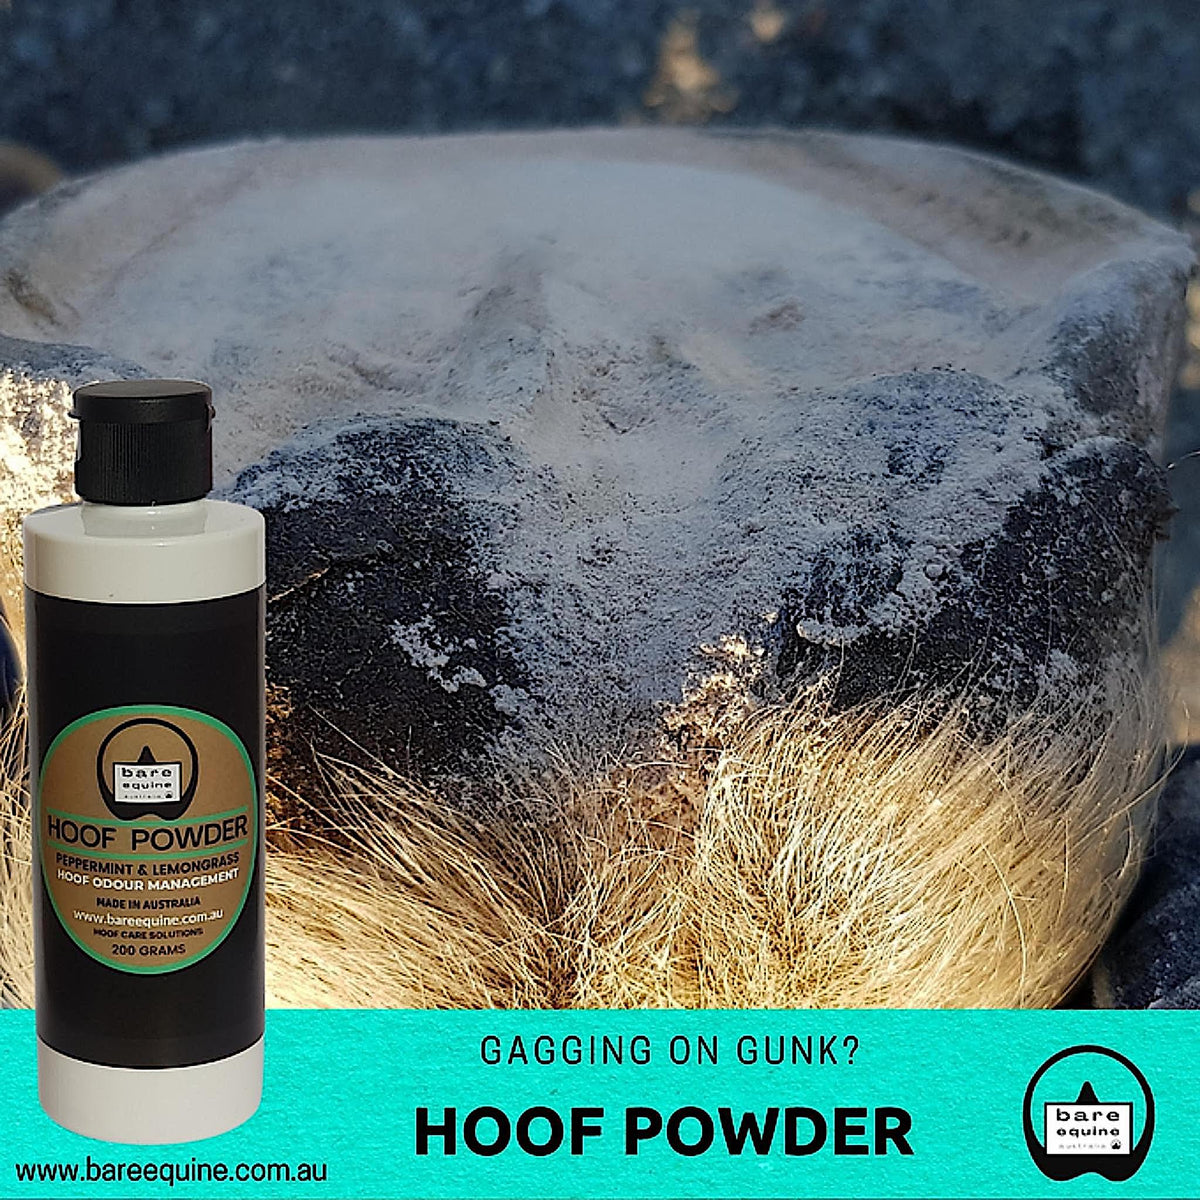 Hoof covered in white powder, with image of the product on side.